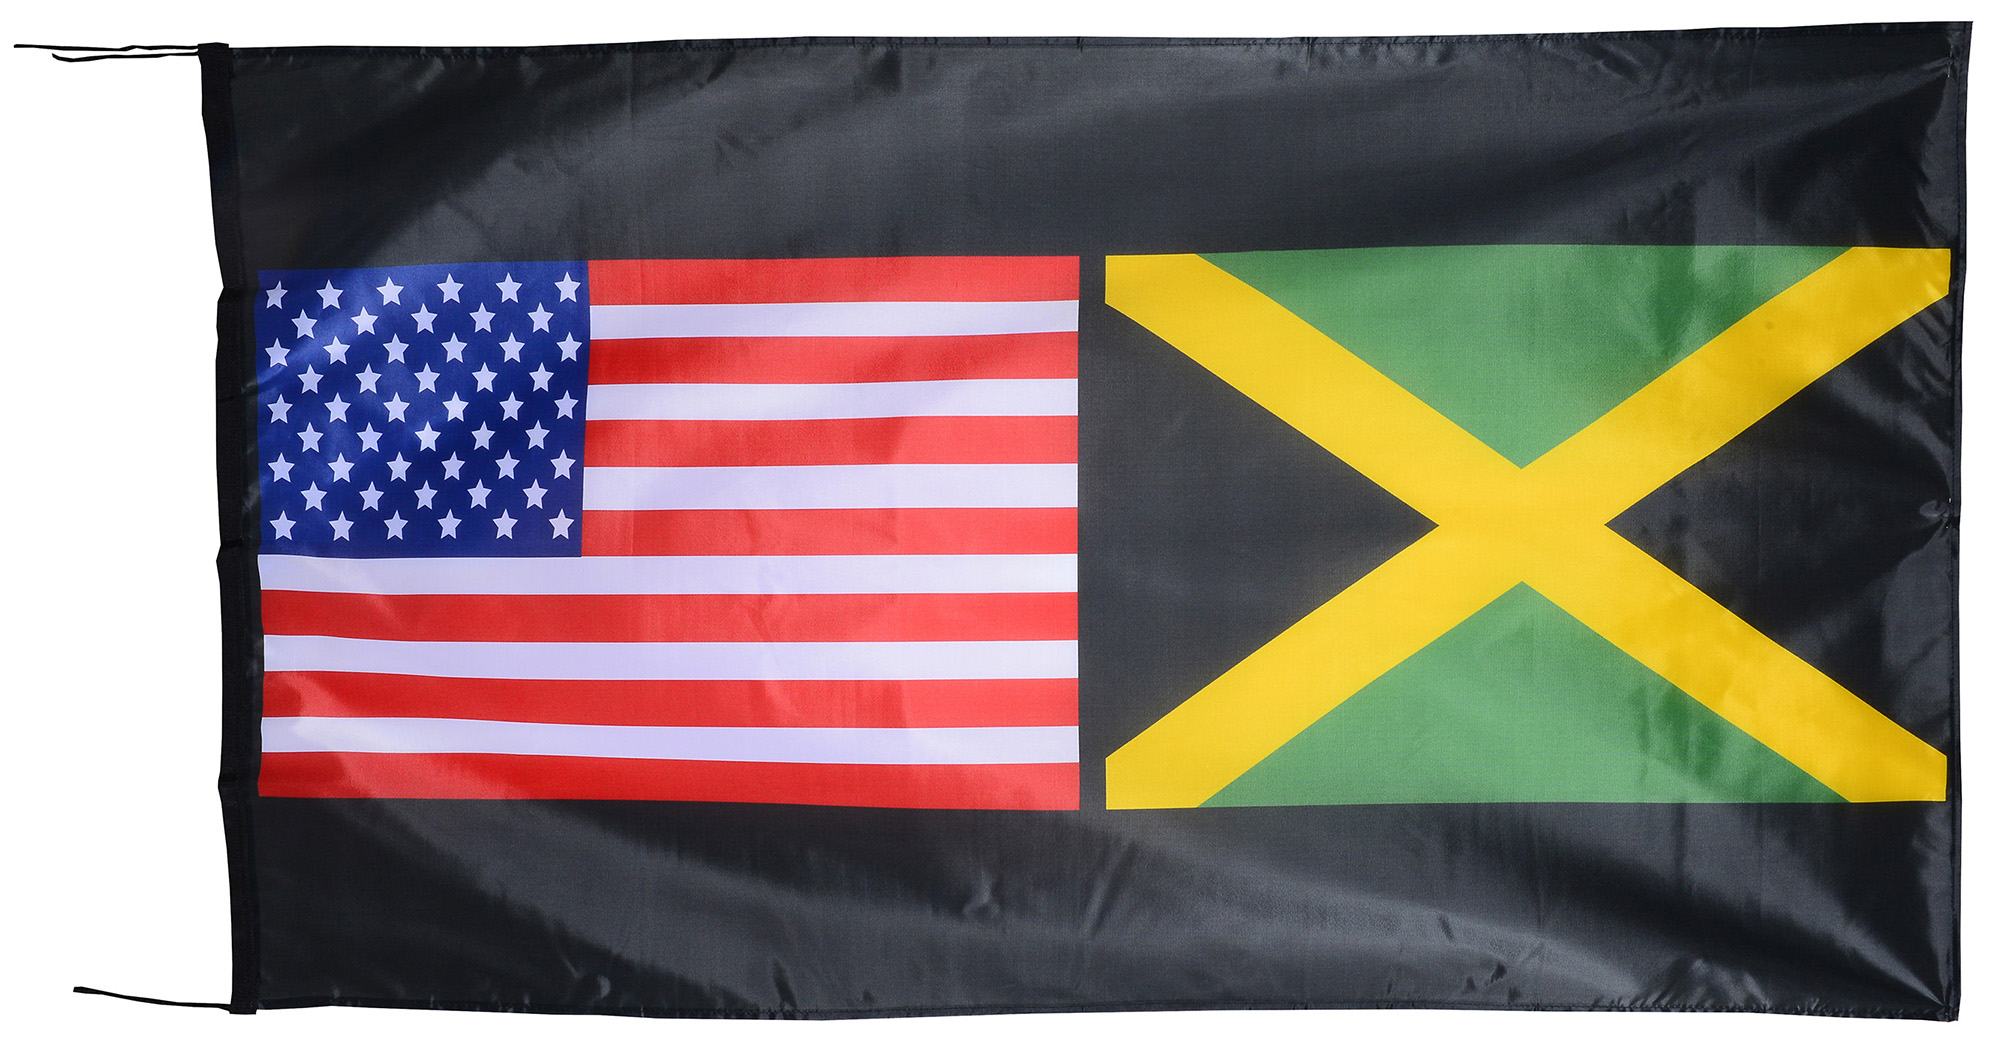 Flag  023 USA / US Country / United States Of America and Georgia State / American Patriotic / Pride Hybrid Weather-Resistant Polyester Outdoor Flag Landscape Banner / Vivid Colors / 3 X 5 FT (150 x 90cm) International Flags for Sale